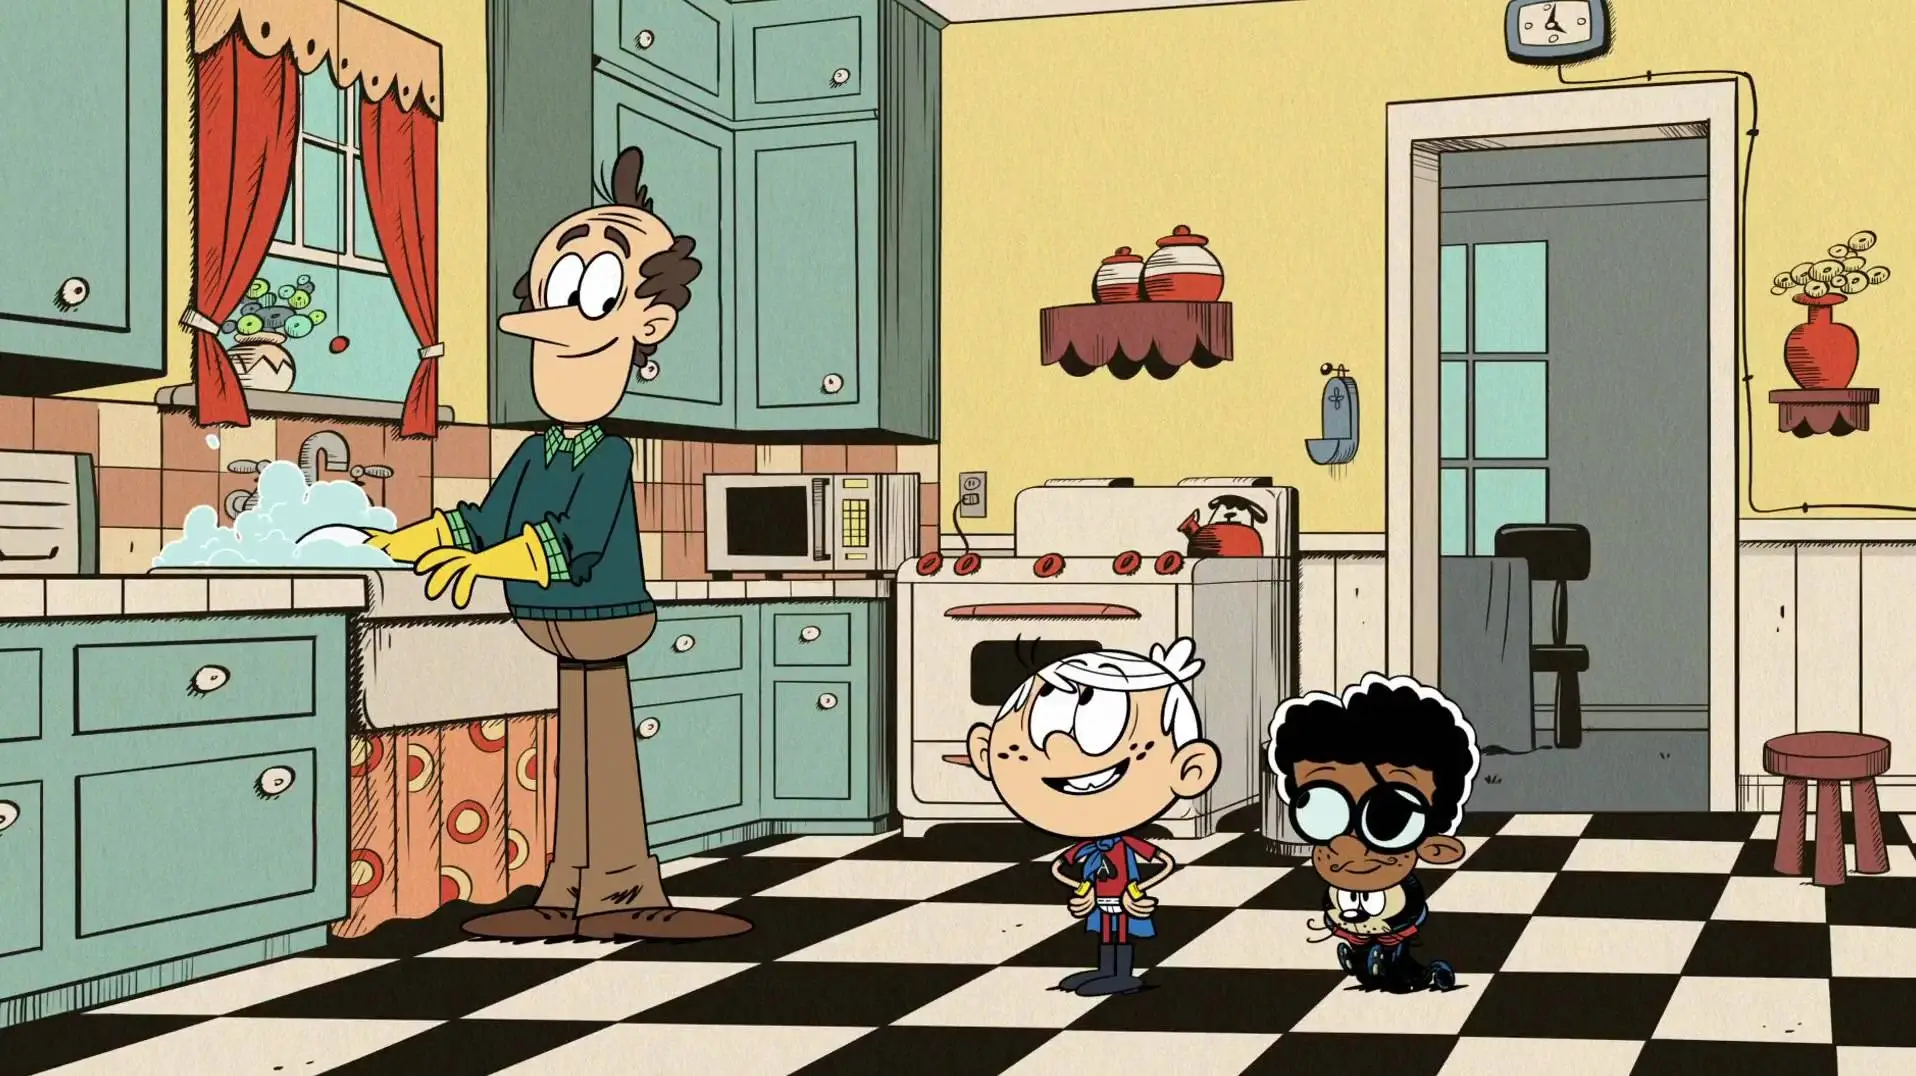 The loud house 2. Theloudhouse. The Loud House. Дом Лаудов комнаты. The Loud House Friendzy.